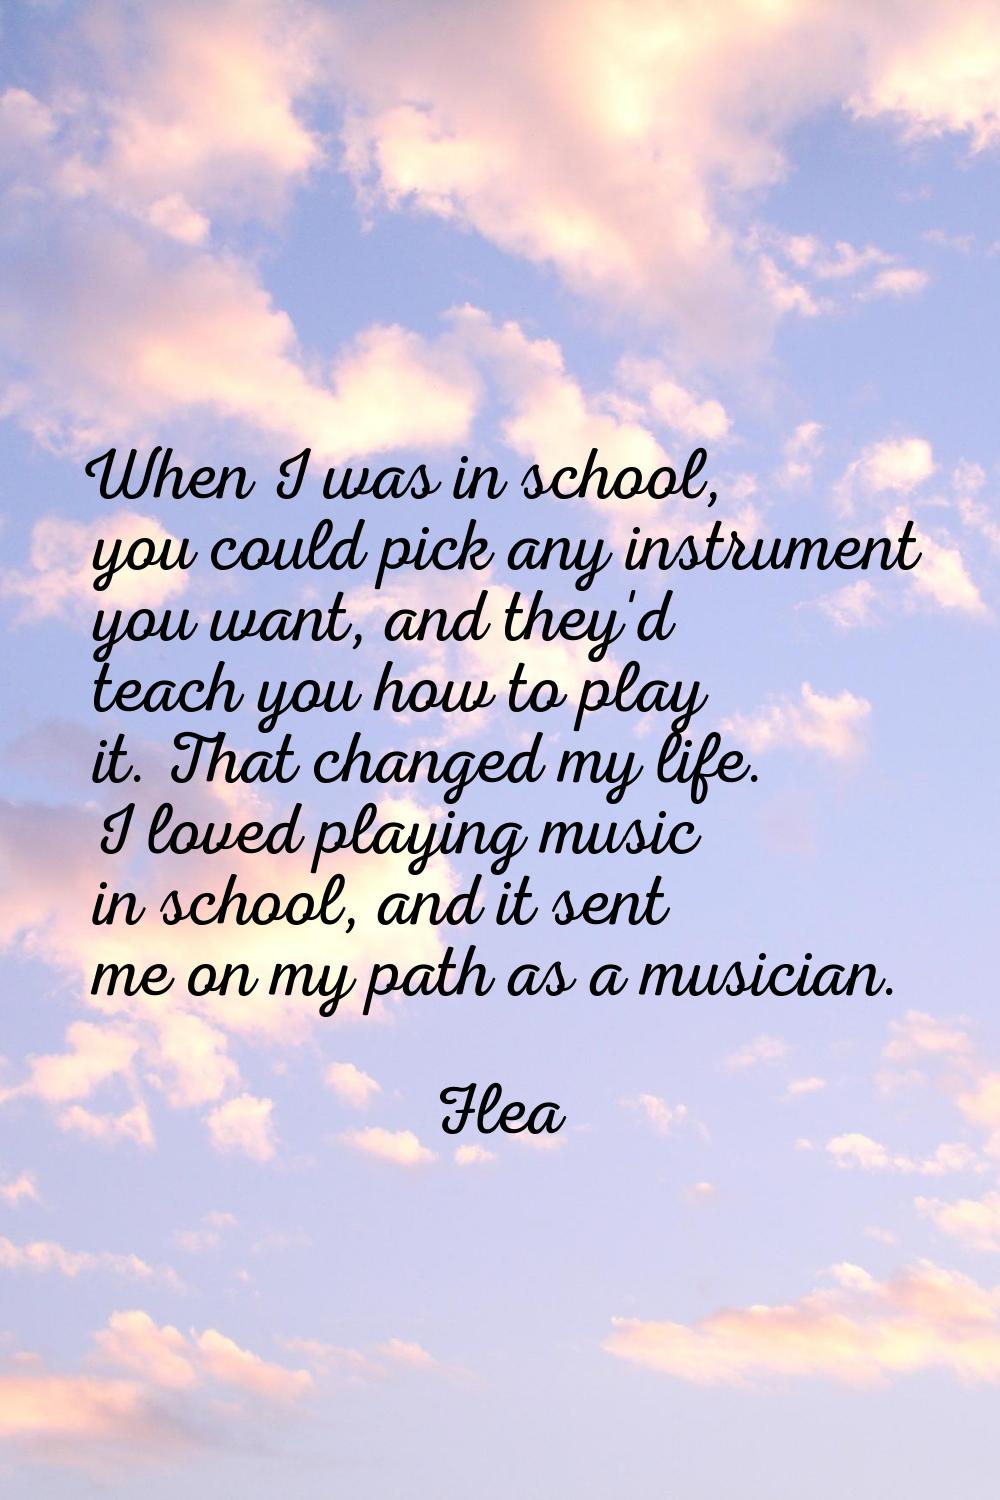 When I was in school, you could pick any instrument you want, and they'd teach you how to play it. 